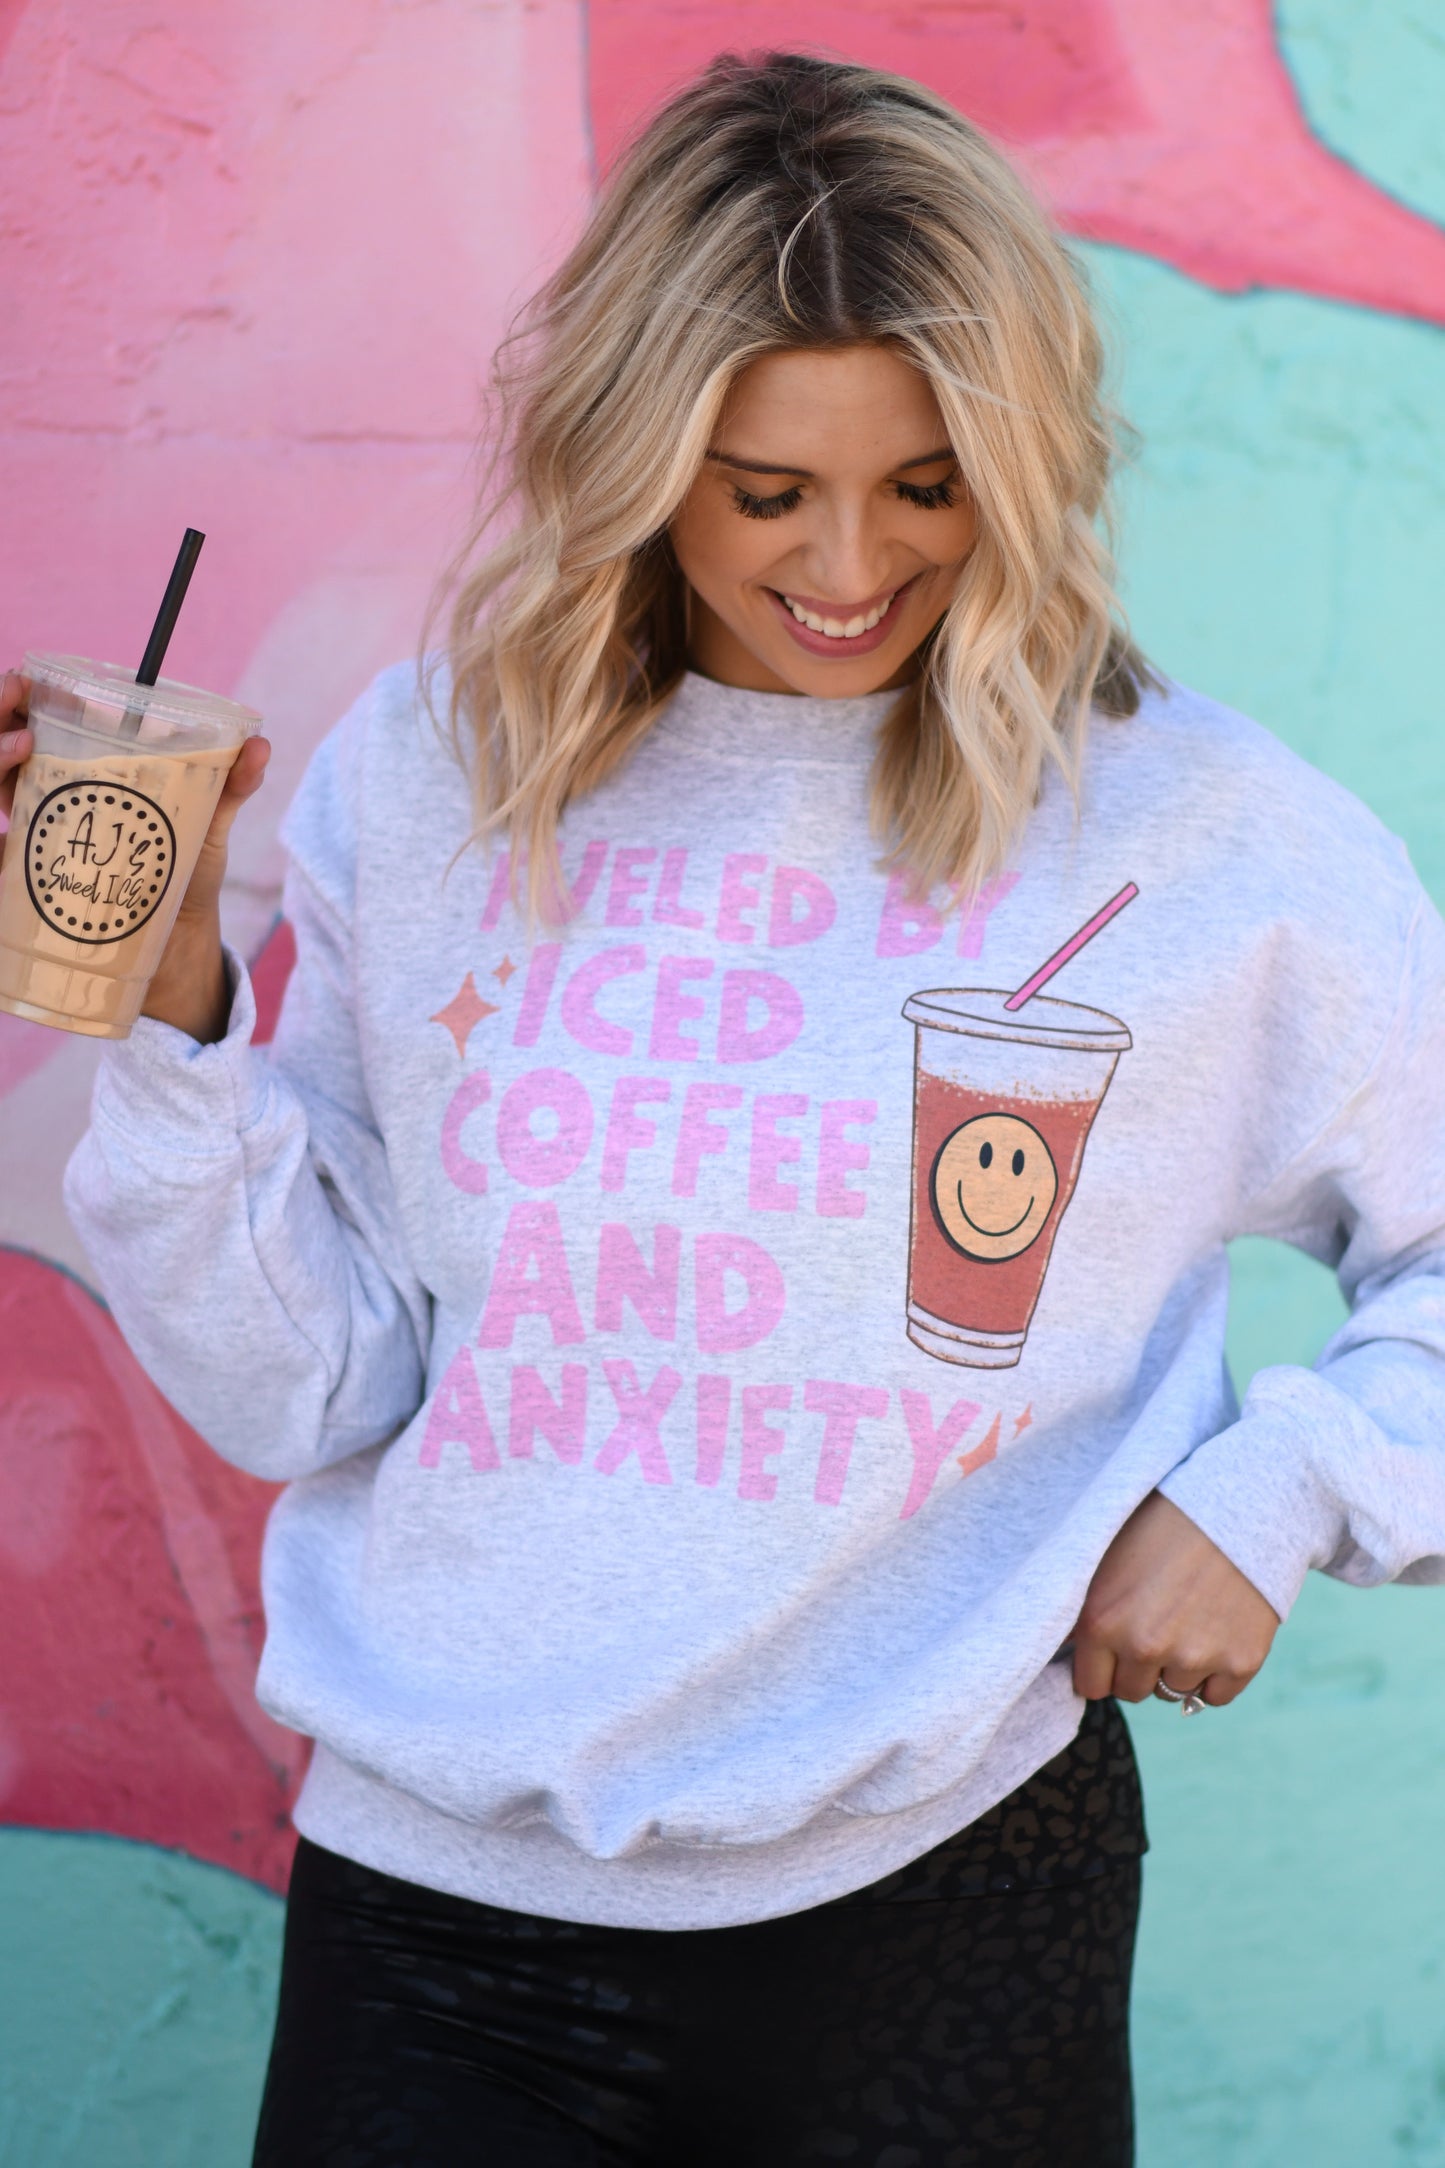 Fueled by Iced Coffee and Anxiety Sweatshirts/Tees